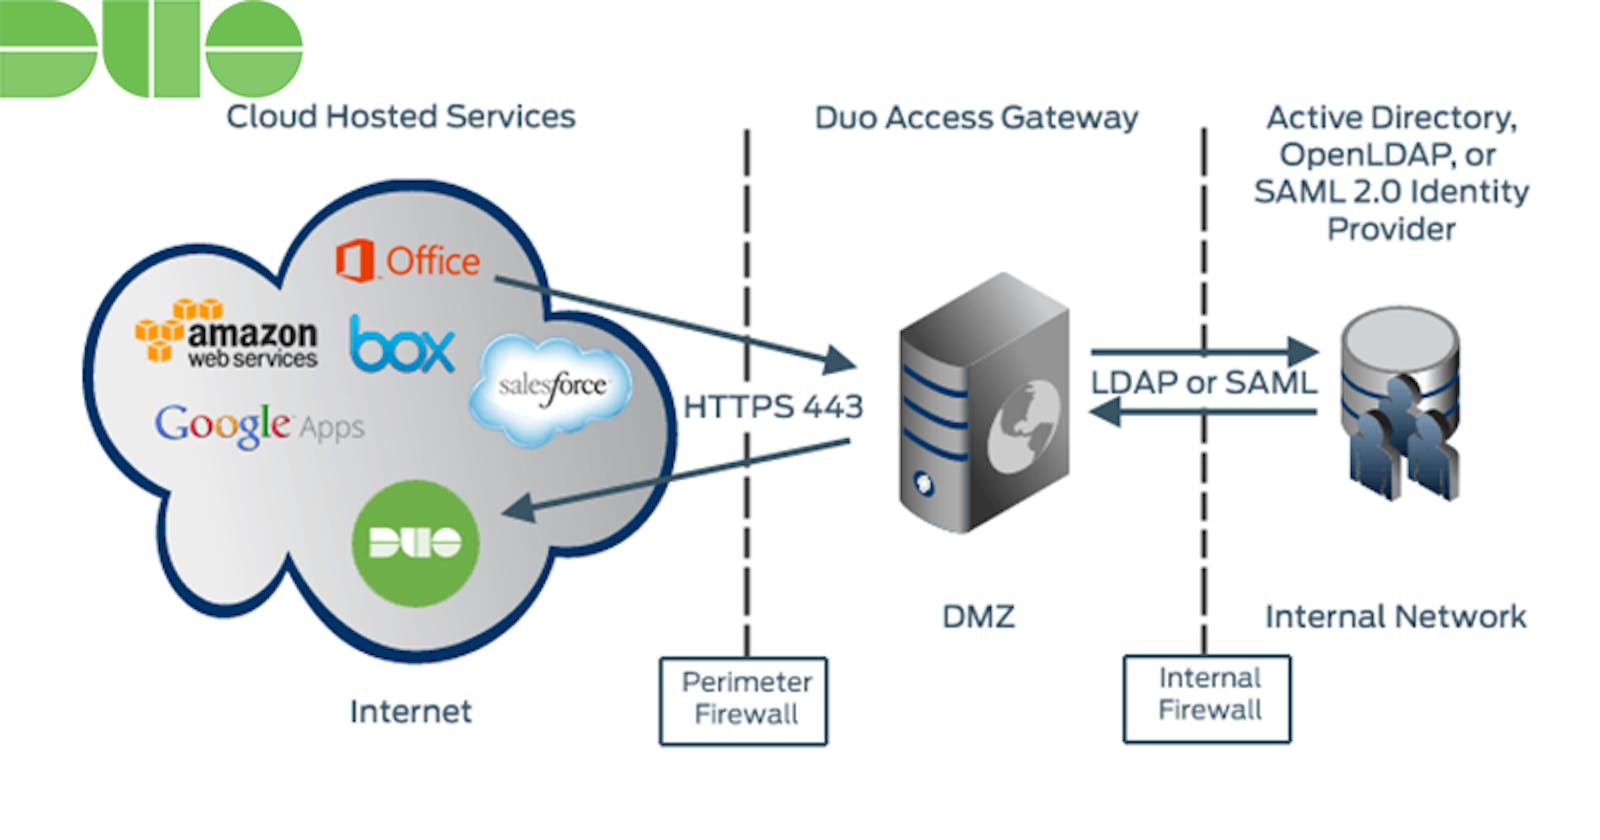 Improving Security: Duo Access Gateway